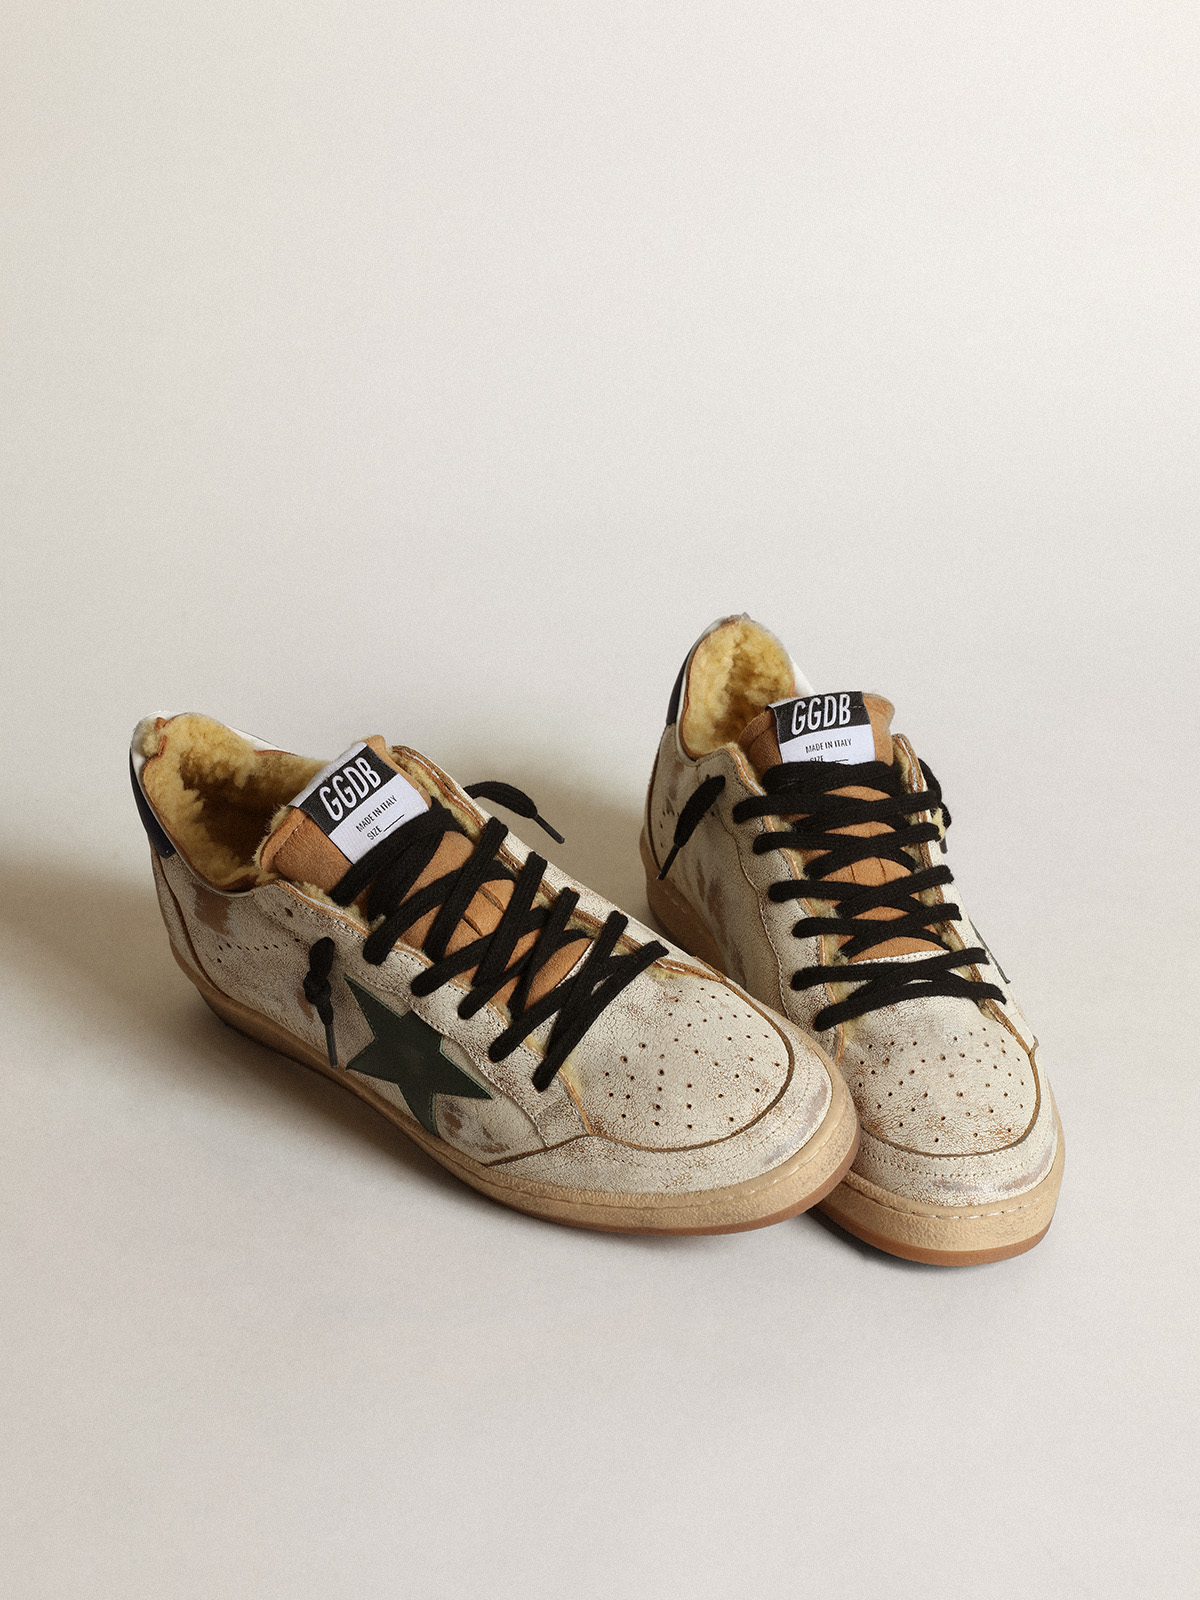 Ball Star sneakers in glossy white leather with dark green leather star and shearling  lining | Golden Goose